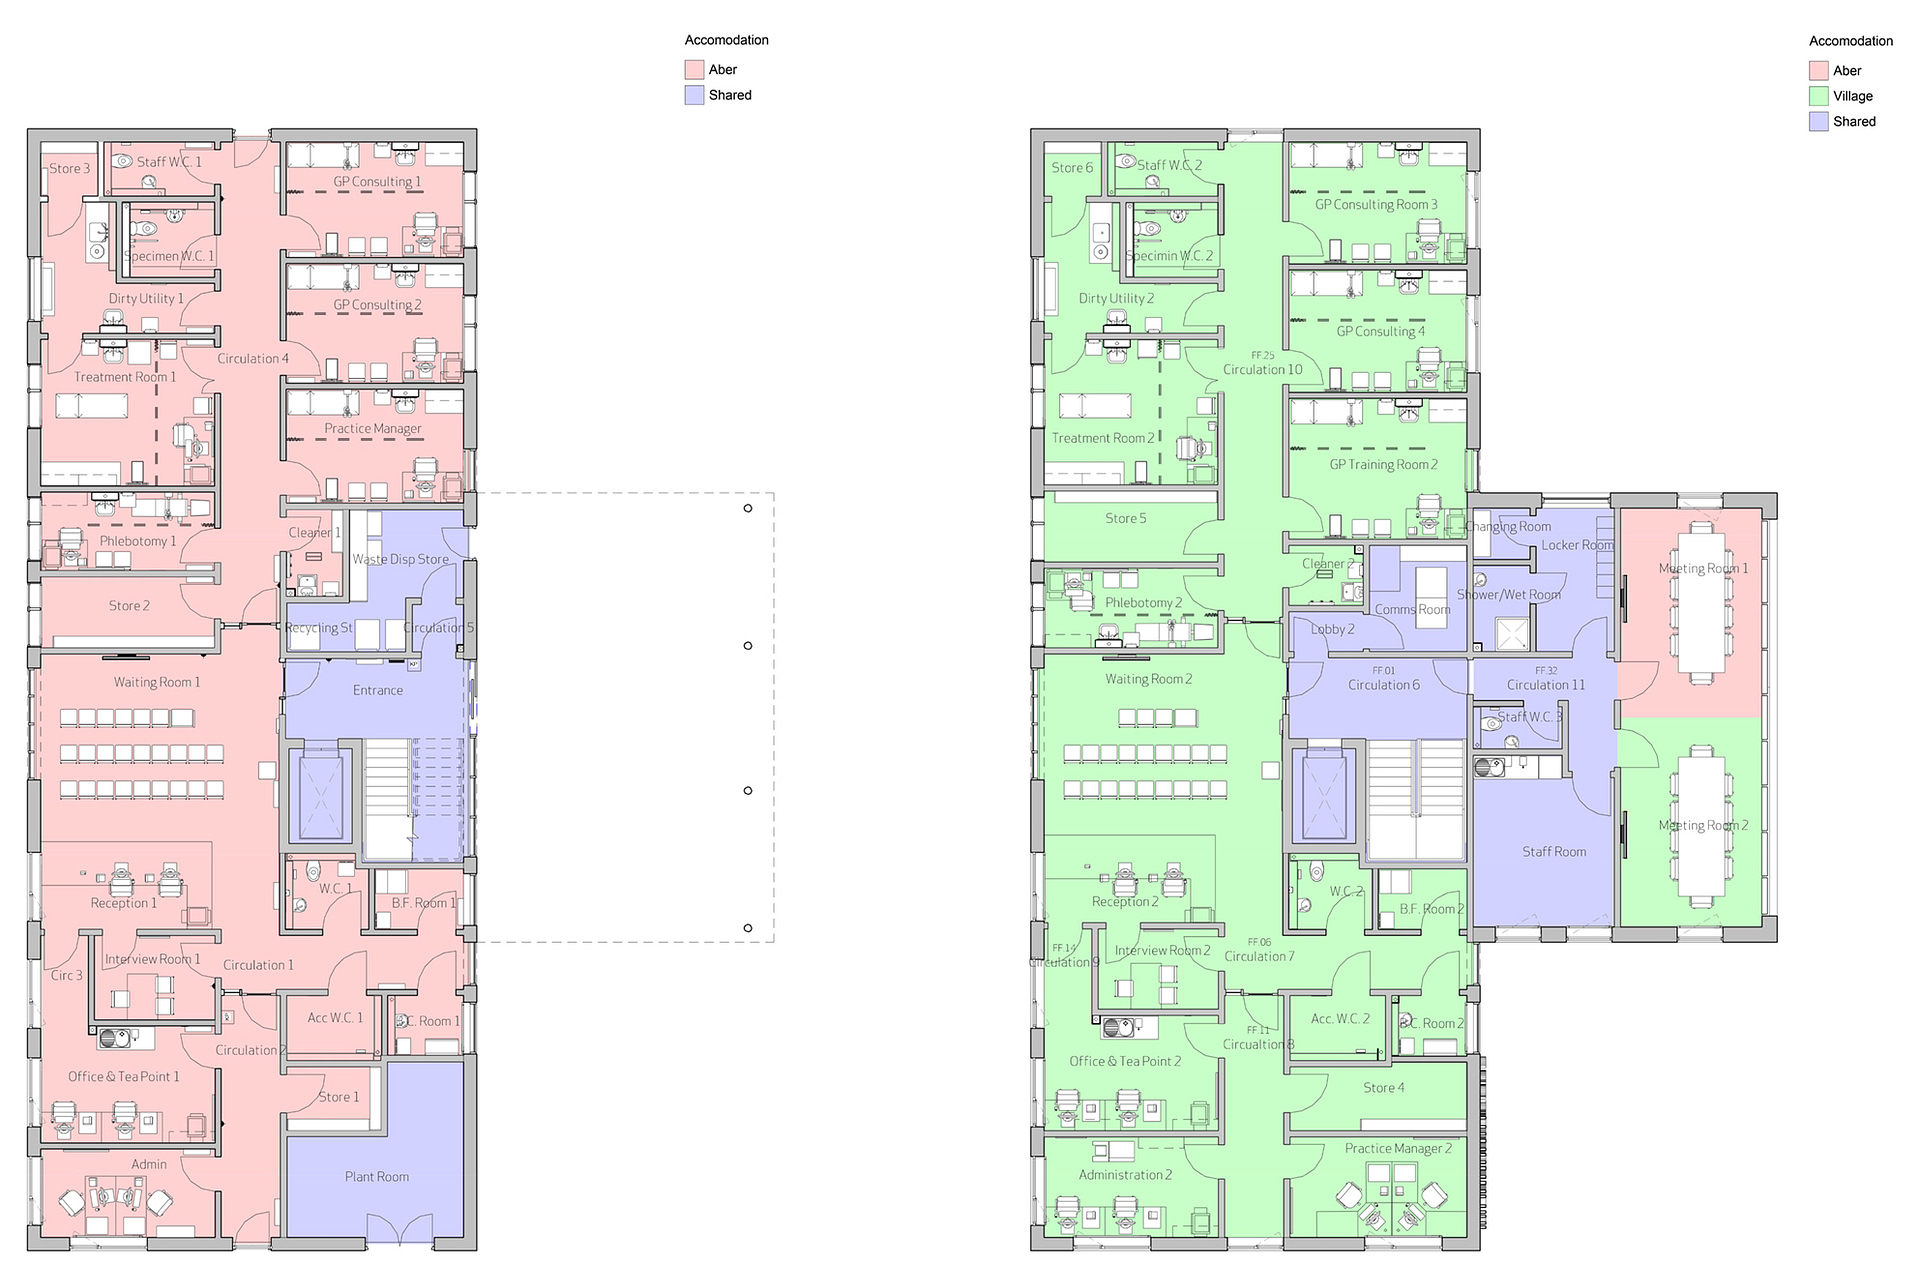 Primary Care Health Centre, Llanbradach, Wales - Floor Plans